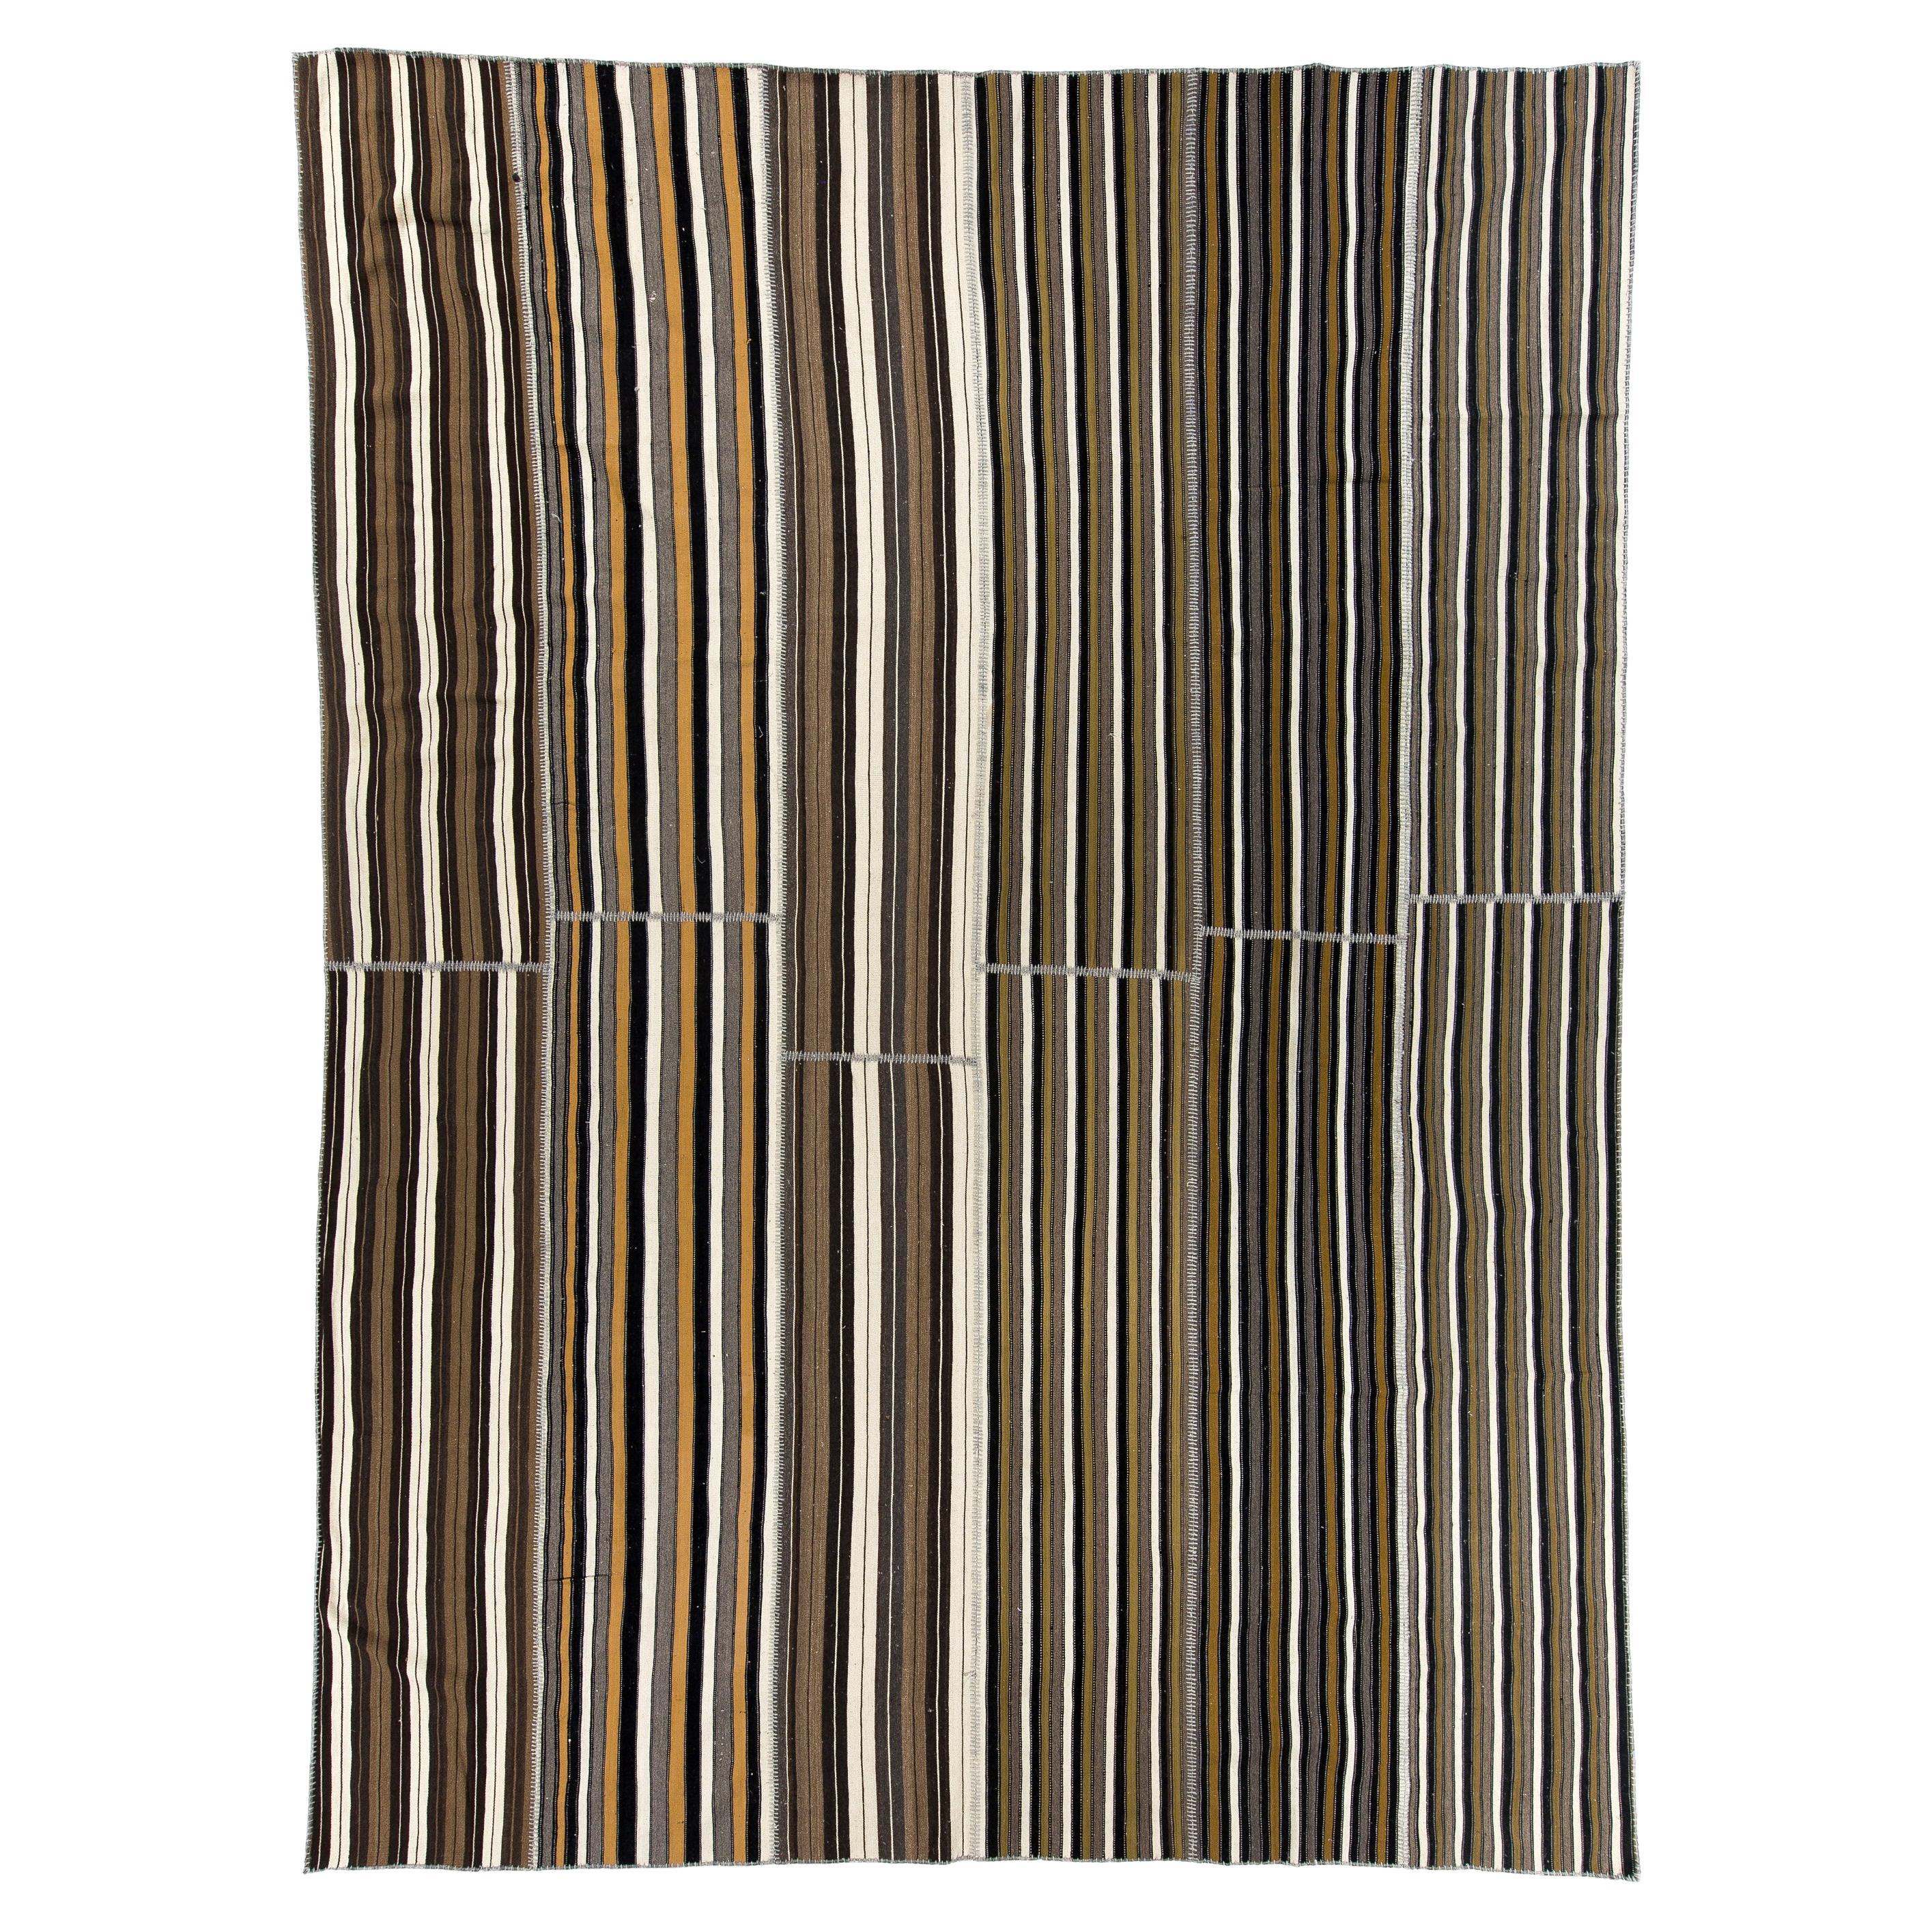 11x15 ft Striped Flat-woven Turkish Kilim in Earthy Colors, Large Minimalist Rug